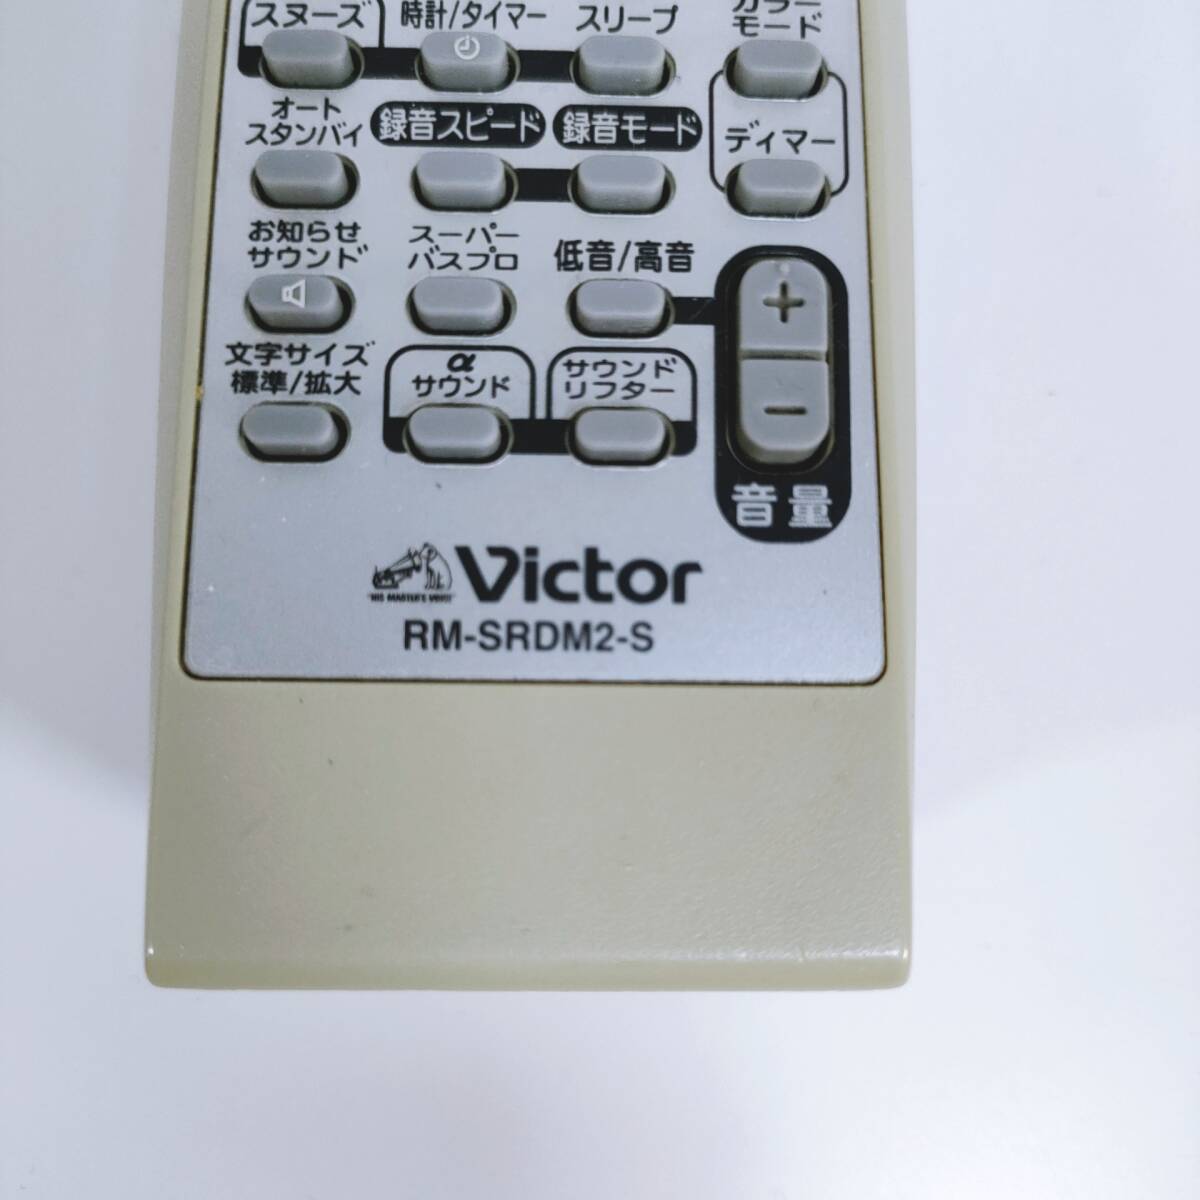 [ operation verification ending ]Victor Victor RM-SRDM2-S (RD-M2 Clavia CD MD portable system ) for remote control infra-red rays luminescence verification settled anonymity delivery 